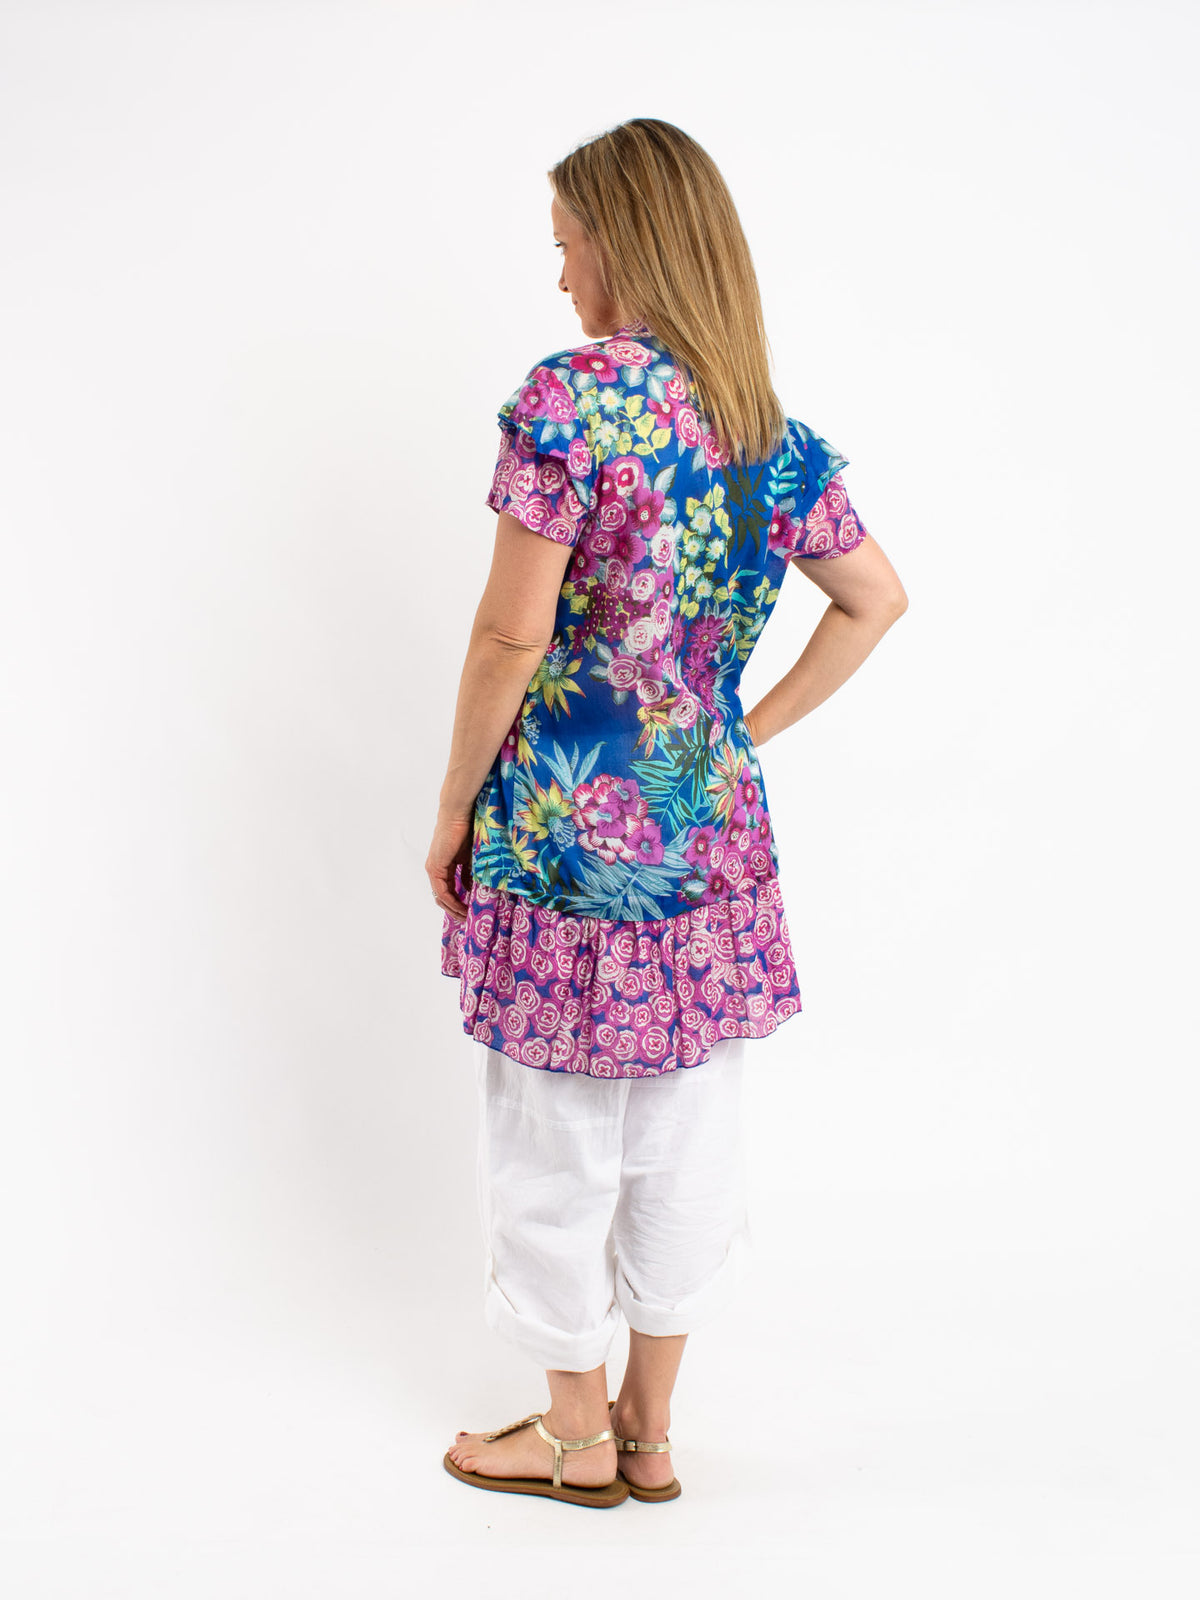 V-Neck Tunic Top in Blue Floral